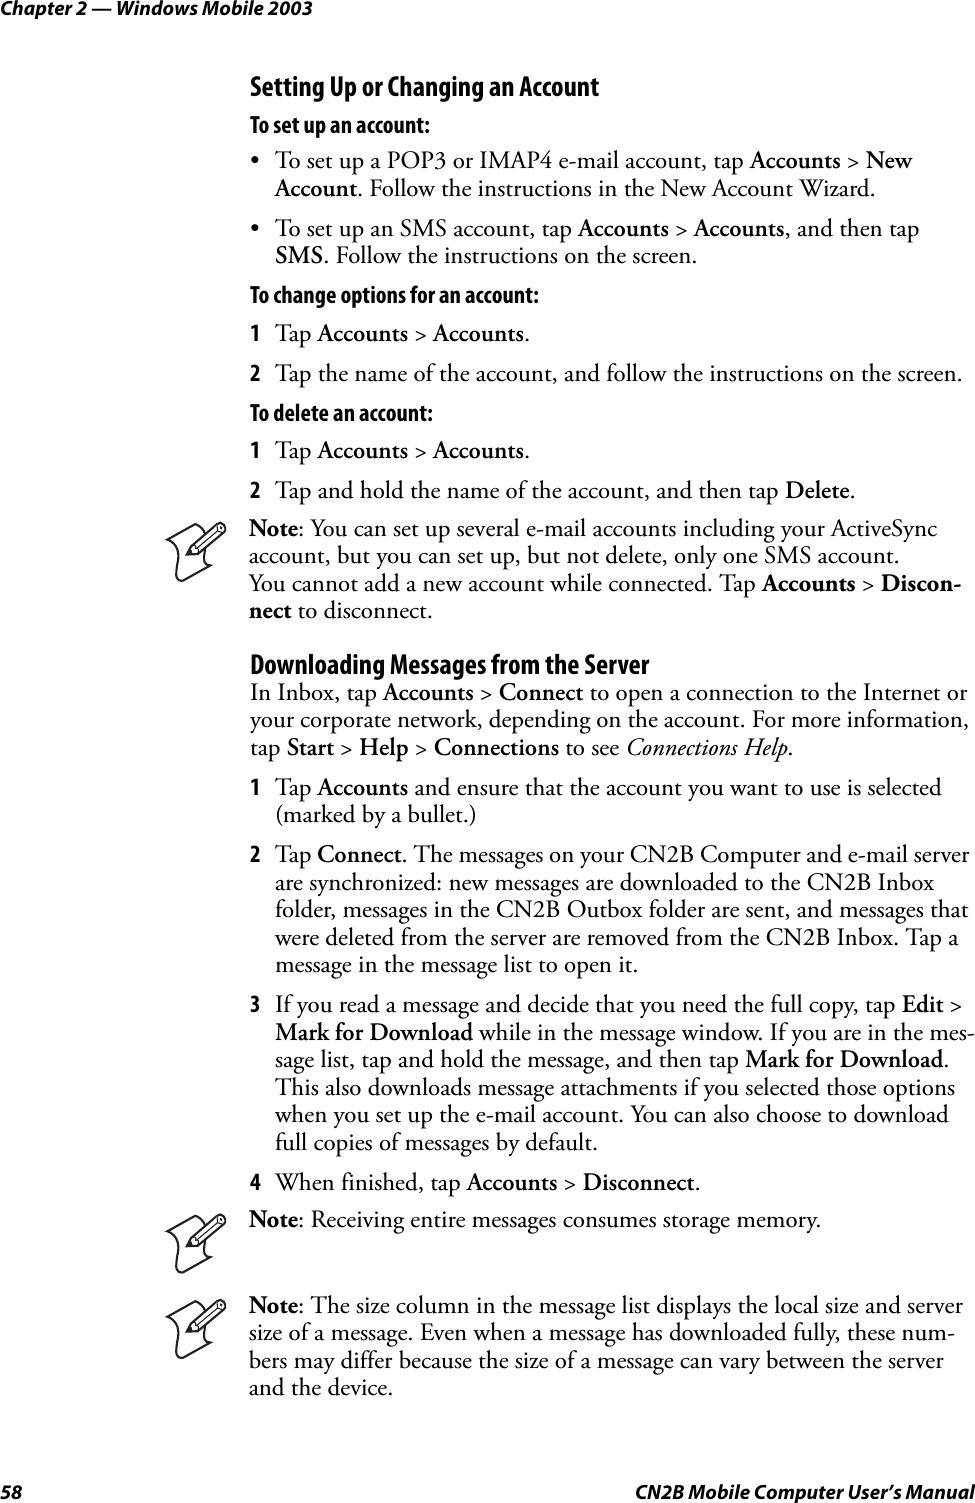 Chapter 2 — Windows Mobile 200358 CN2B Mobile Computer User’s ManualSetting Up or Changing an AccountTo set up an account:• To set up a POP3 or IMAP4 e-mail account, tap Accounts &gt; New Account. Follow the instructions in the New Account Wizard.• To set up an SMS account, tap Accounts &gt; Accounts, and then tap SMS. Follow the instructions on the screen.To change options for an account:1Tap Accounts &gt; Accounts.2Tap the name of the account, and follow the instructions on the screen.To delete an account:1Tap Accounts &gt; Accounts.2Tap and hold the name of the account, and then tap Delete.Downloading Messages from the ServerIn Inbox, tap Accounts &gt; Connect to open a connection to the Internet or your corporate network, depending on the account. For more information, tap Start &gt; Help &gt; Connections to see Connections Help.1Tap Accounts and ensure that the account you want to use is selected (marked by a bullet.)2Tap Connect. The messages on your CN2B Computer and e-mail server are synchronized: new messages are downloaded to the CN2B Inbox folder, messages in the CN2B Outbox folder are sent, and messages that were deleted from the server are removed from the CN2B Inbox. Tap a message in the message list to open it.3If you read a message and decide that you need the full copy, tap Edit &gt; Mark for Download while in the message window. If you are in the mes-sage list, tap and hold the message, and then tap Mark for Download. This also downloads message attachments if you selected those options when you set up the e-mail account. You can also choose to download full copies of messages by default.4When finished, tap Accounts &gt; Disconnect.Note: You can set up several e-mail accounts including your ActiveSync account, but you can set up, but not delete, only one SMS account. You cannot add a new account while connected. Tap Accounts &gt; Discon-nect to disconnect.Note: Receiving entire messages consumes storage memory.Note: The size column in the message list displays the local size and server size of a message. Even when a message has downloaded fully, these num-bers may differ because the size of a message can vary between the server and the device.